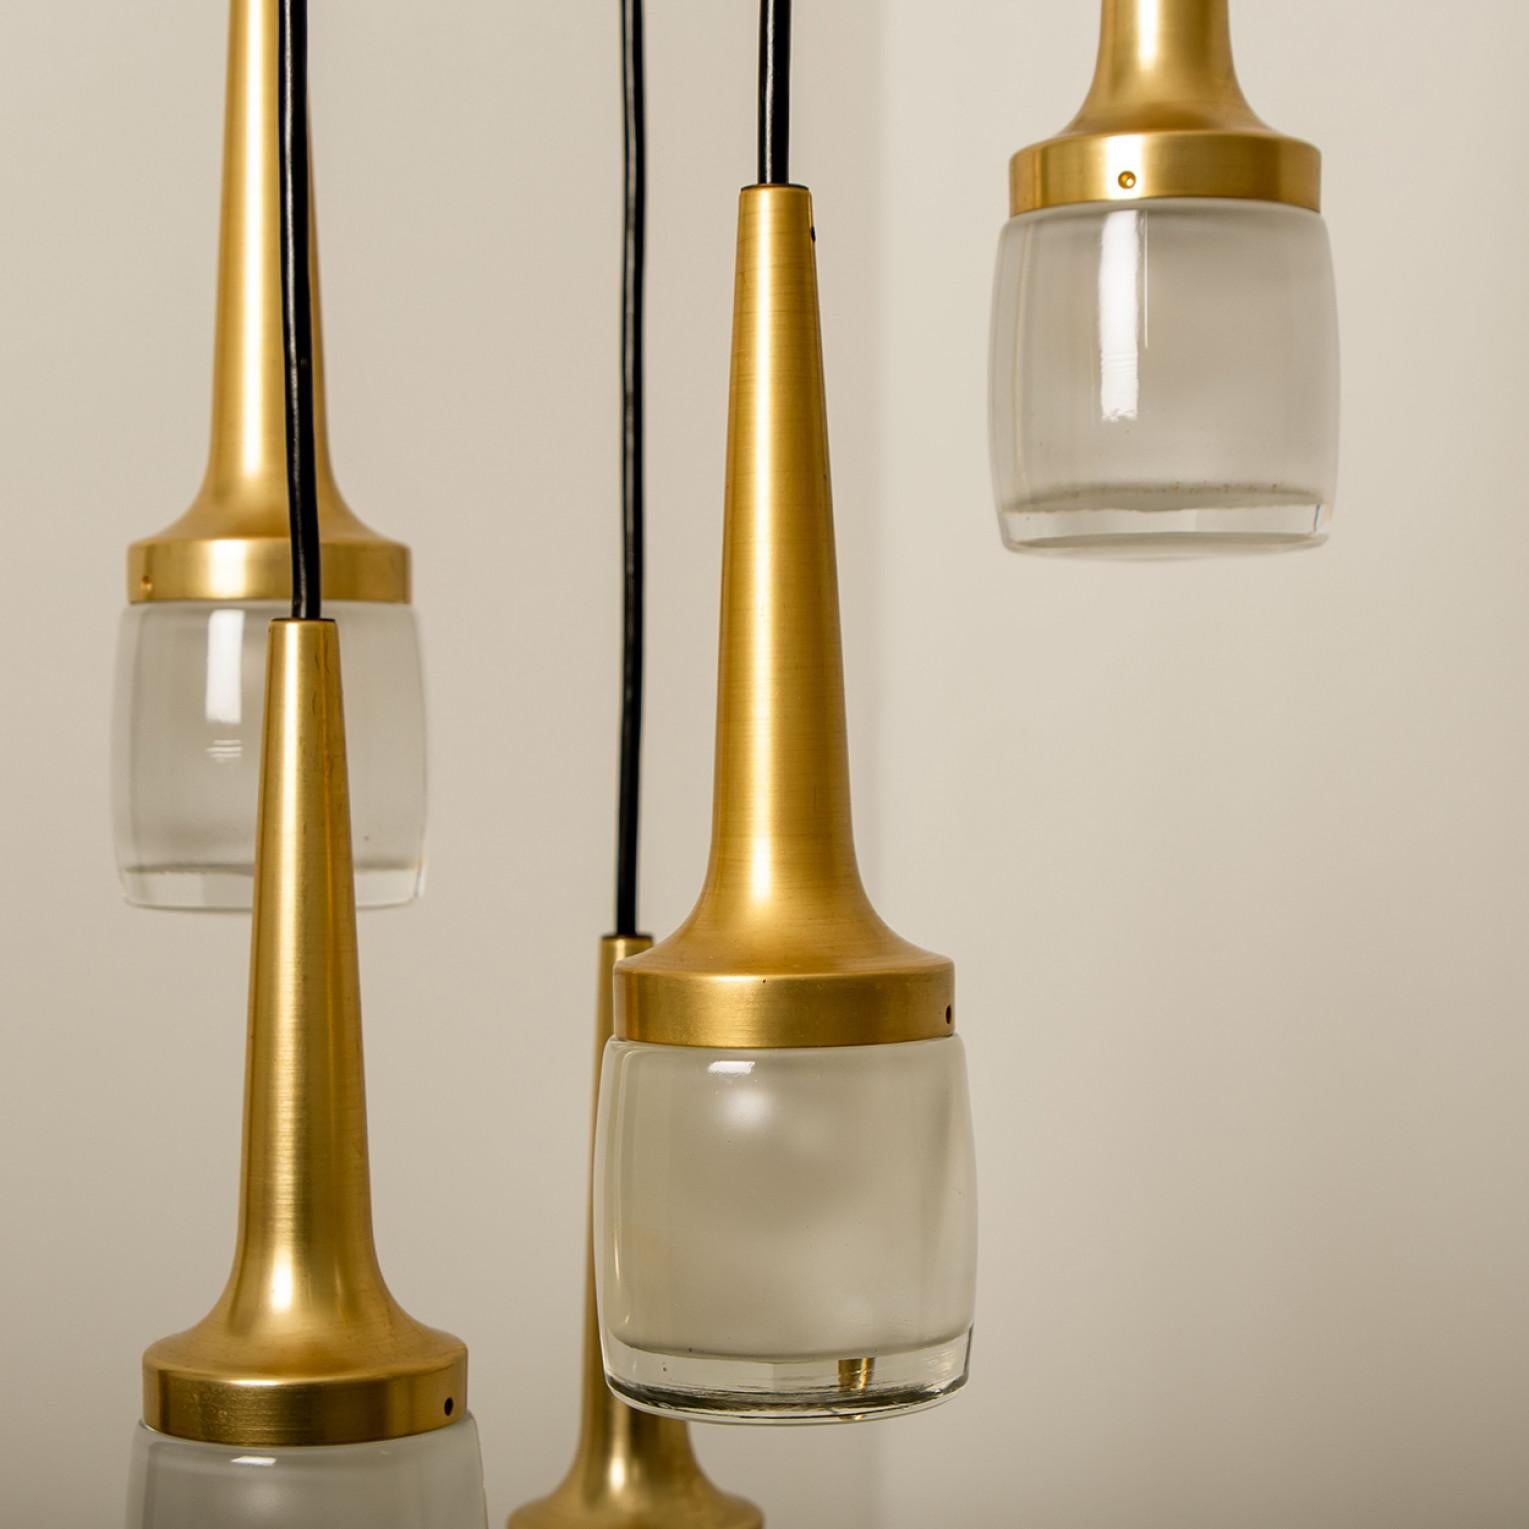 1 of the 2 elegant cascade with 6 light fixtures was manufactured by Staff Leuchten in Germany. The light is executed in brassed aluminium and thick off white opaline molded glass etched on the inside. Playful to arrange by playing with the length